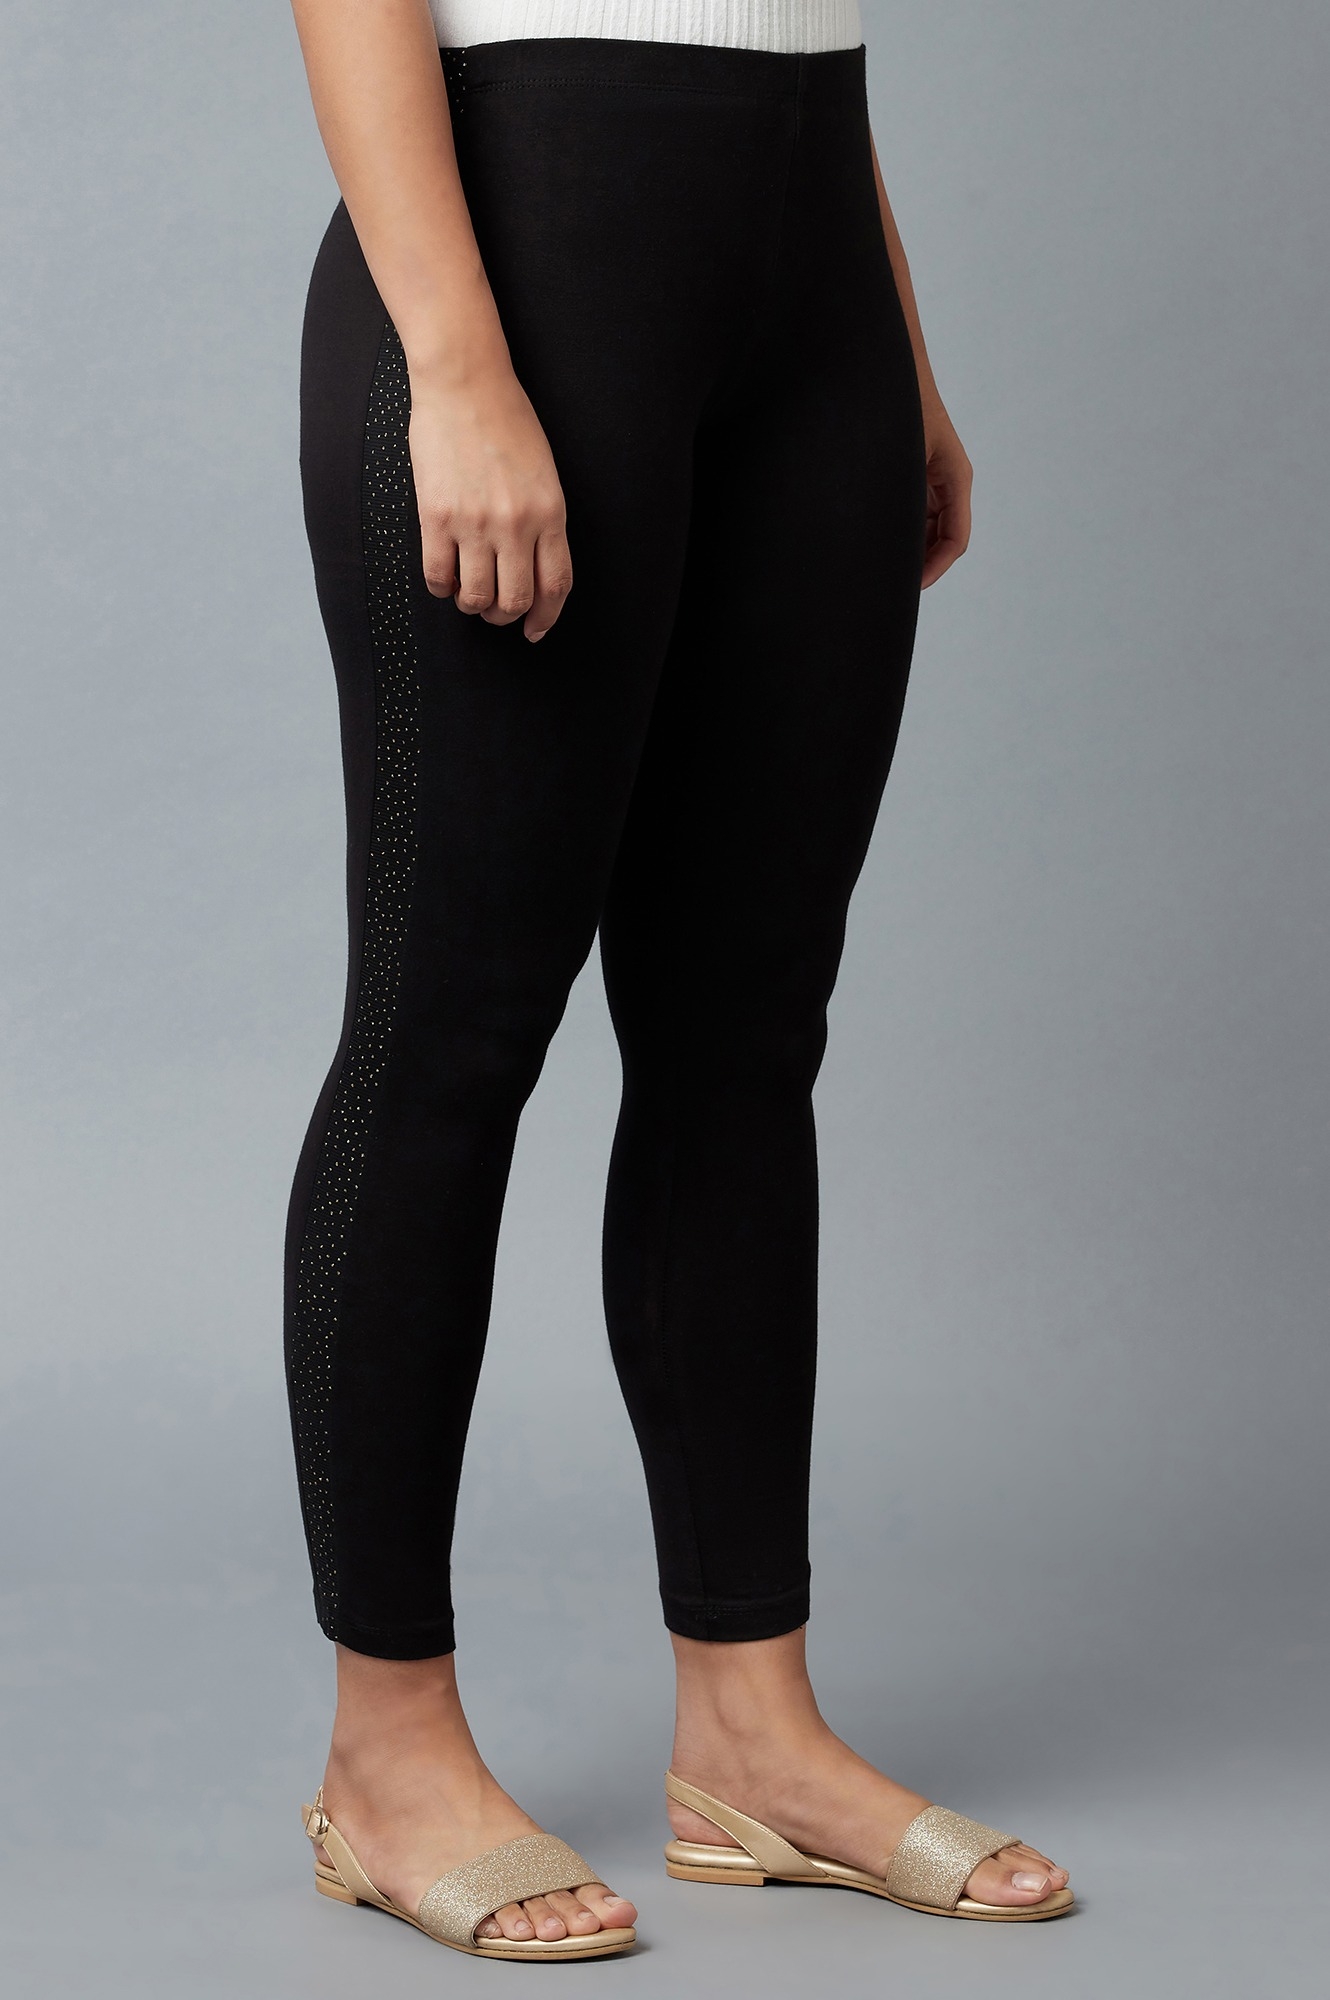 Buy NP CREATION Exclusive Plain Cotton Lycra Ankle Length Leggings Black &  White Combo Free Size at Amazon.in